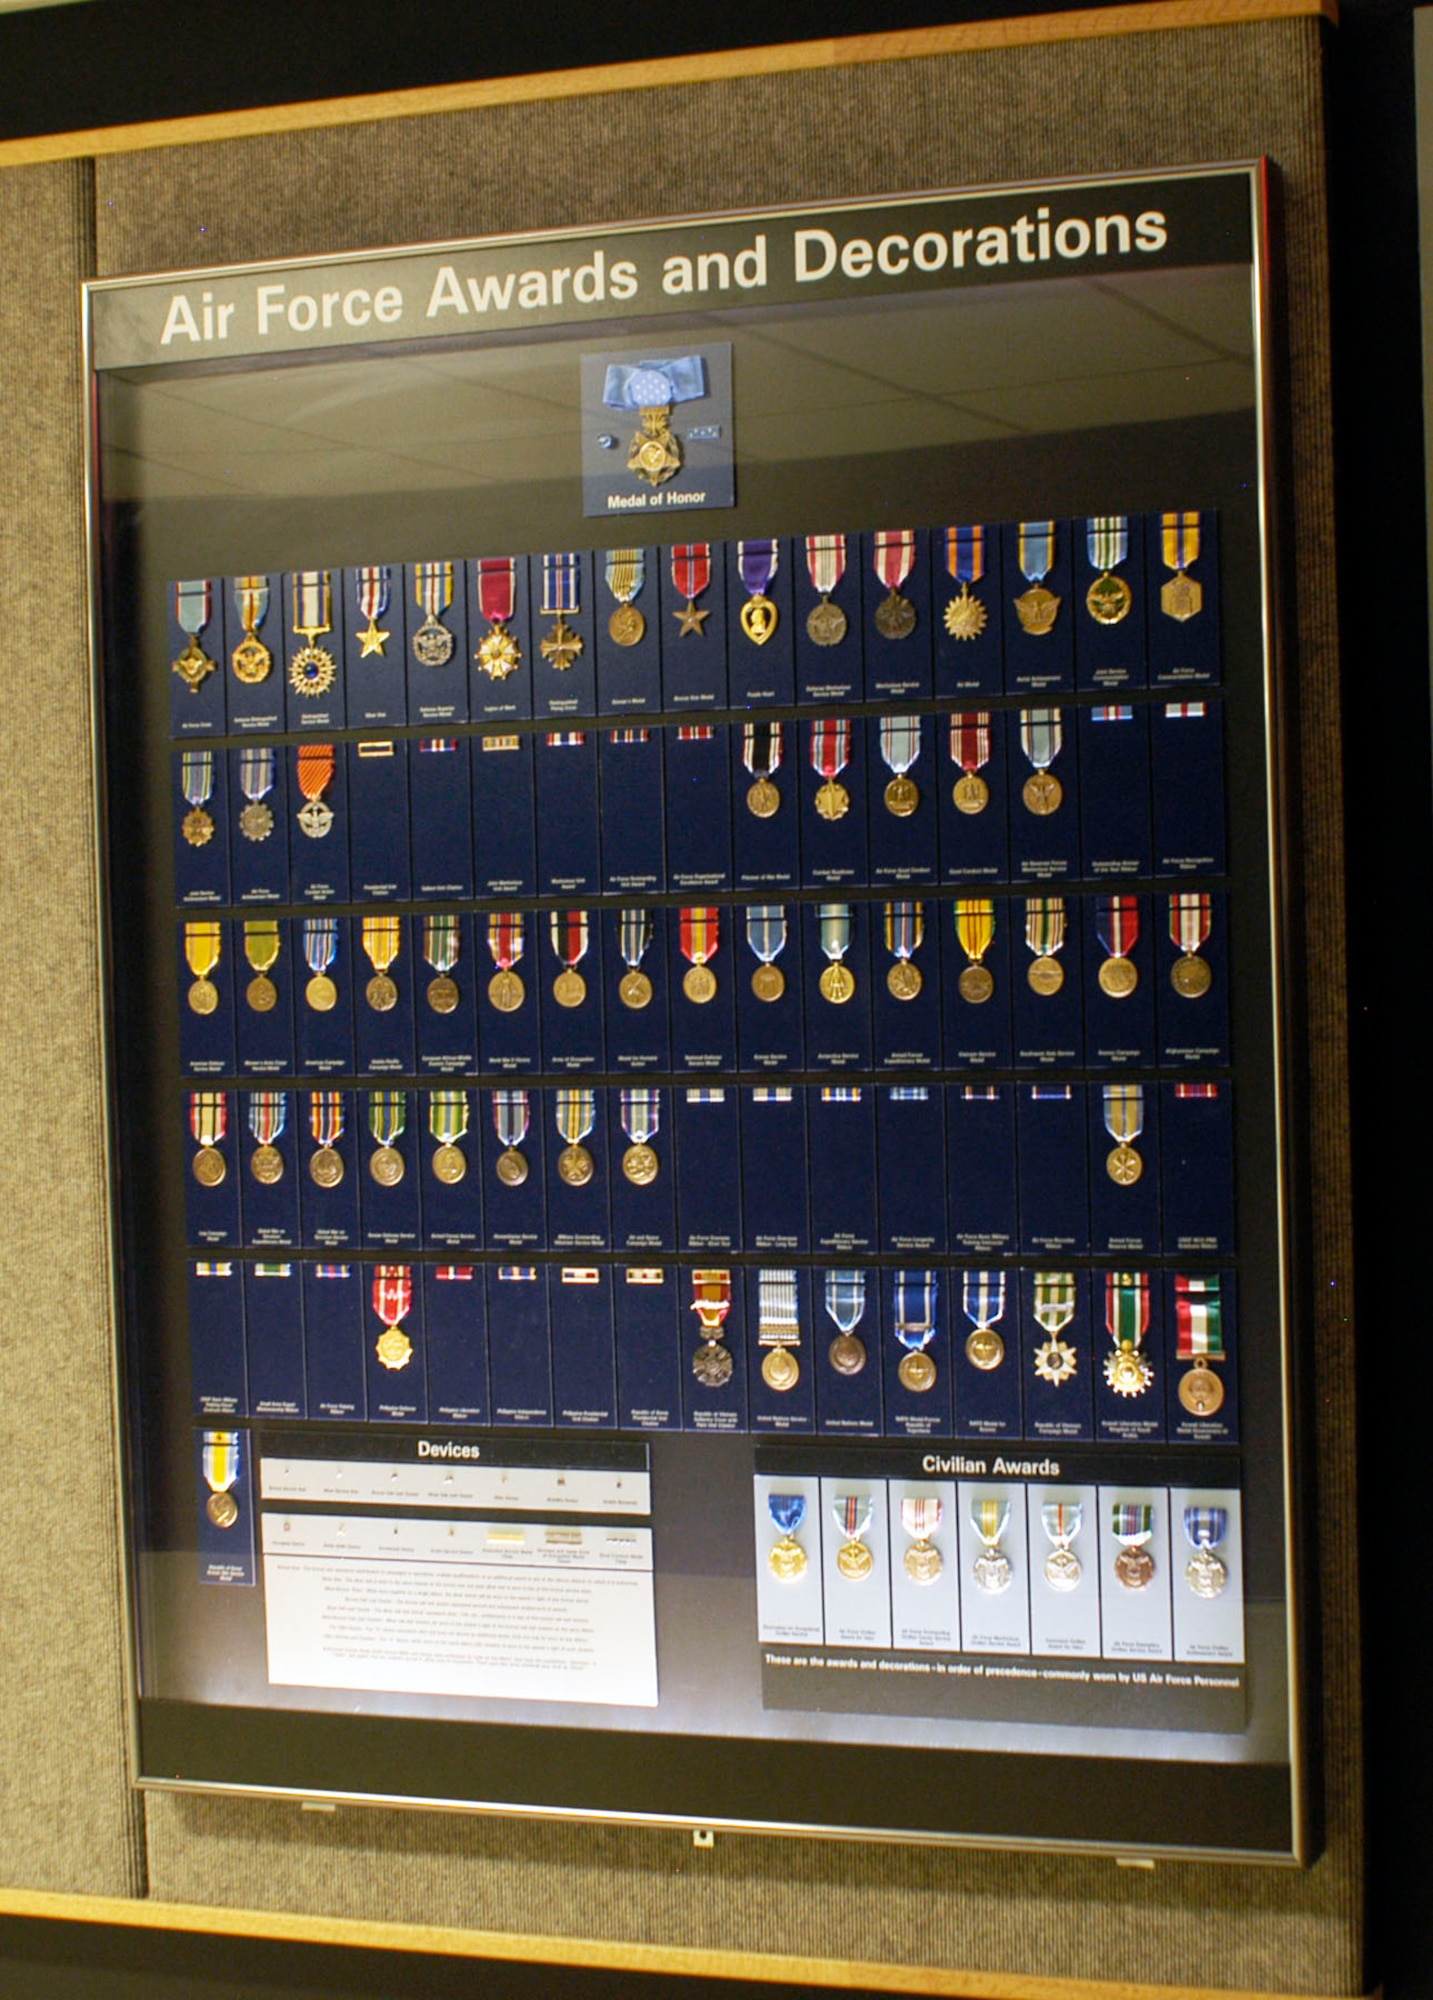 DAYTON, Ohio -- USAF Awards and Decorations exhibit at the National Museum of the U.S. Air Force. (U.S. Air Force photo)